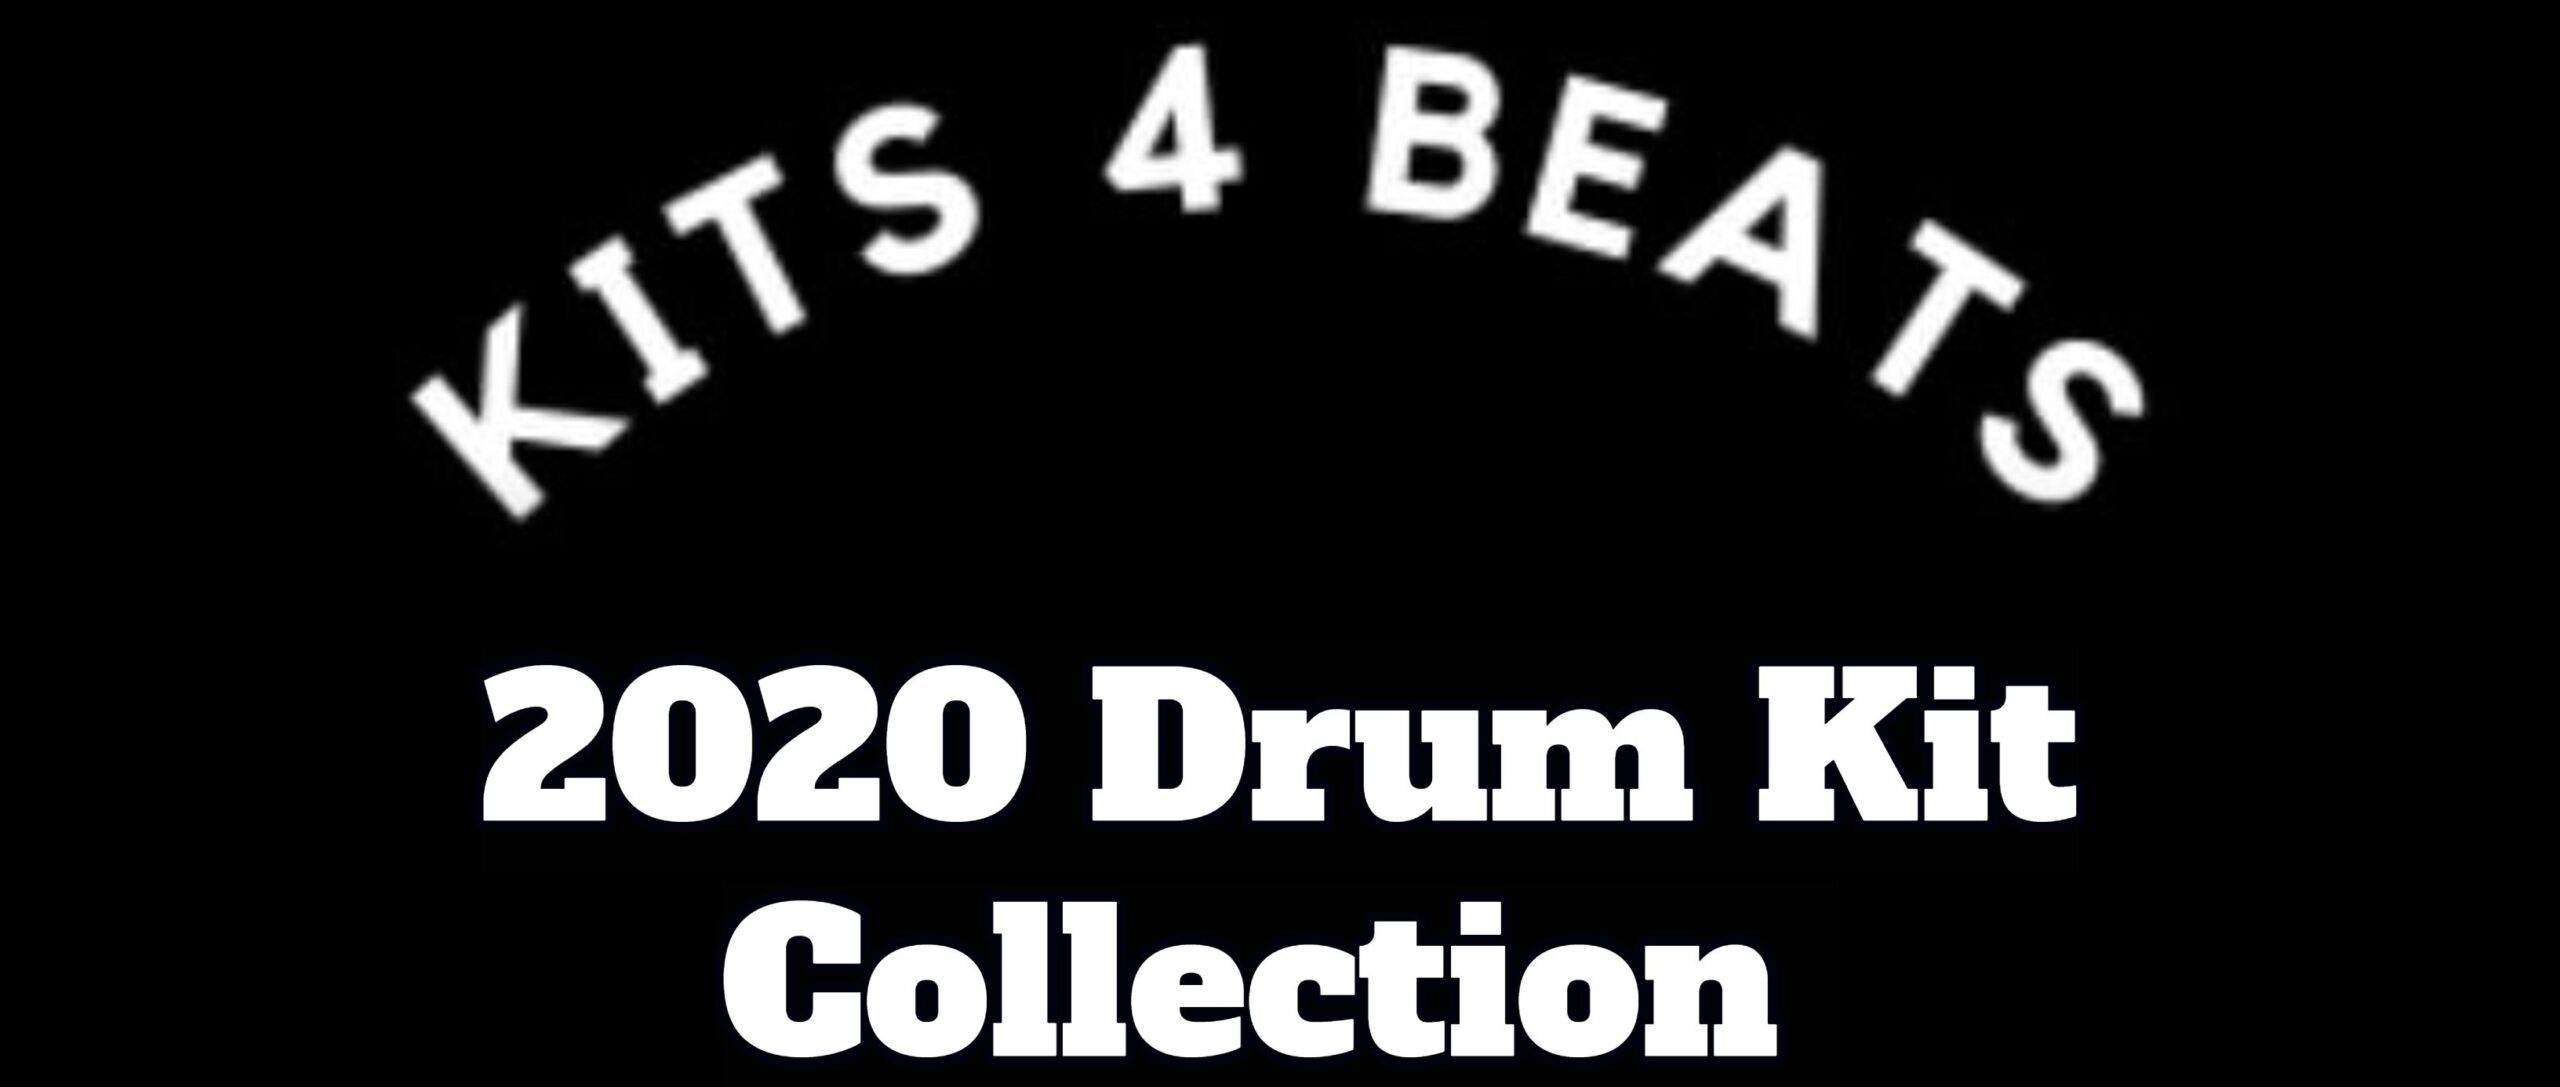 2020 Drum Kits Collection Free Download (90+ GB)